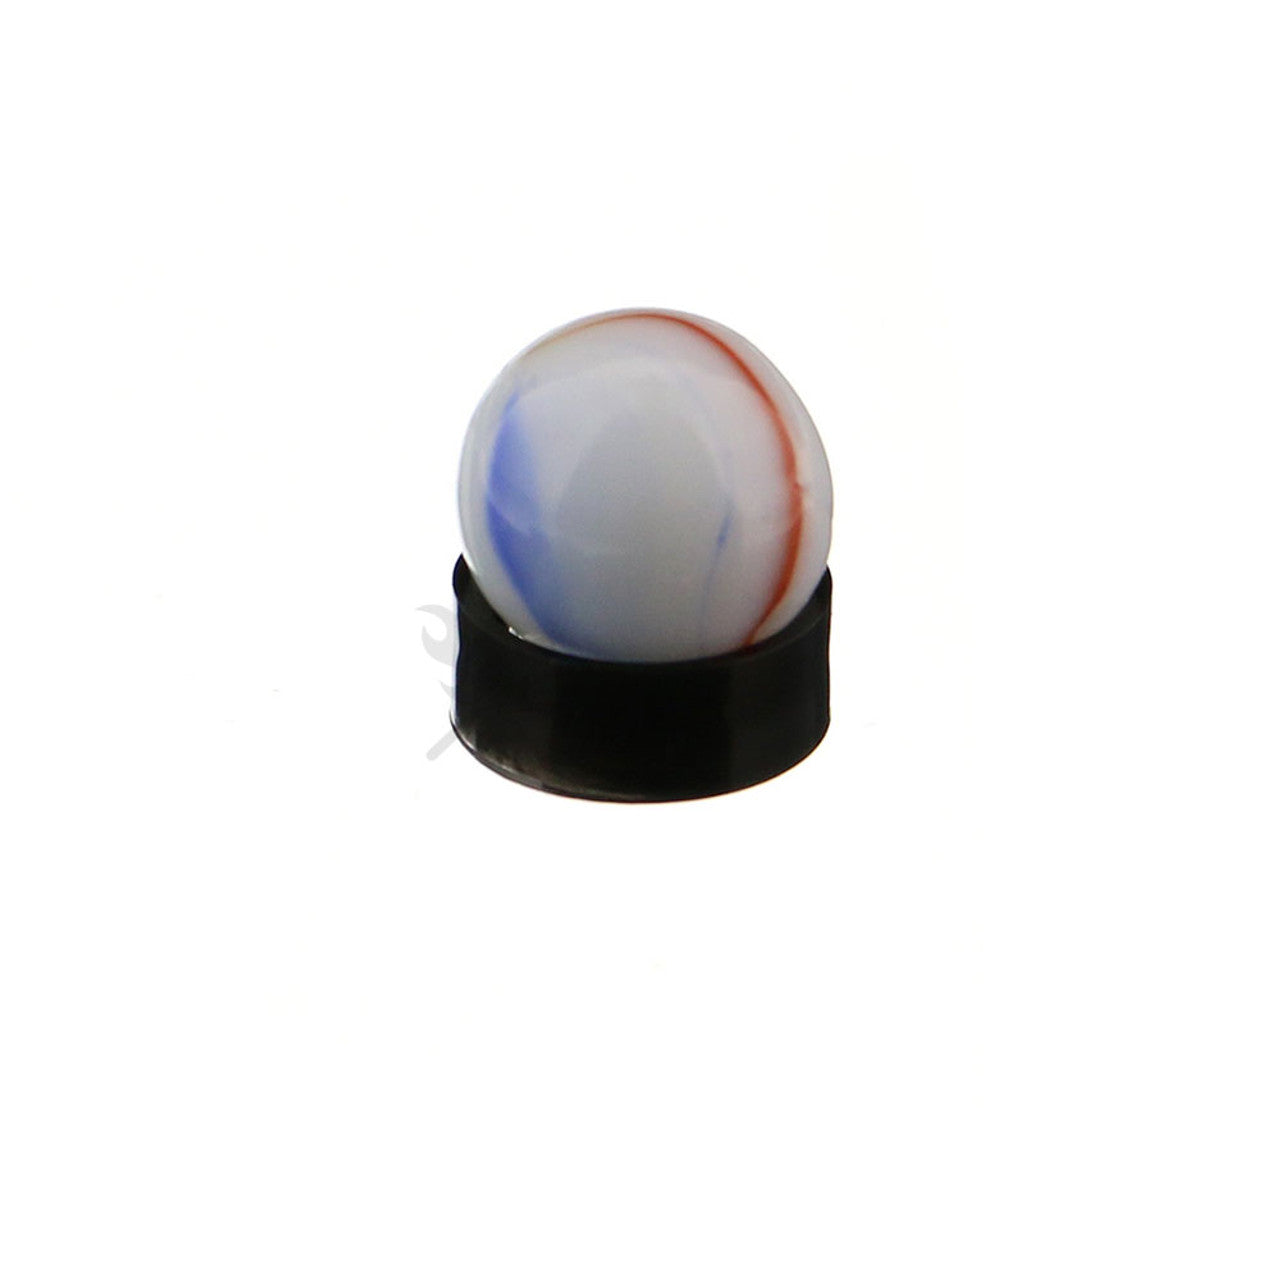 5/8" x 1/4" Acrylic Beveled Ring Marble Sphere Stands